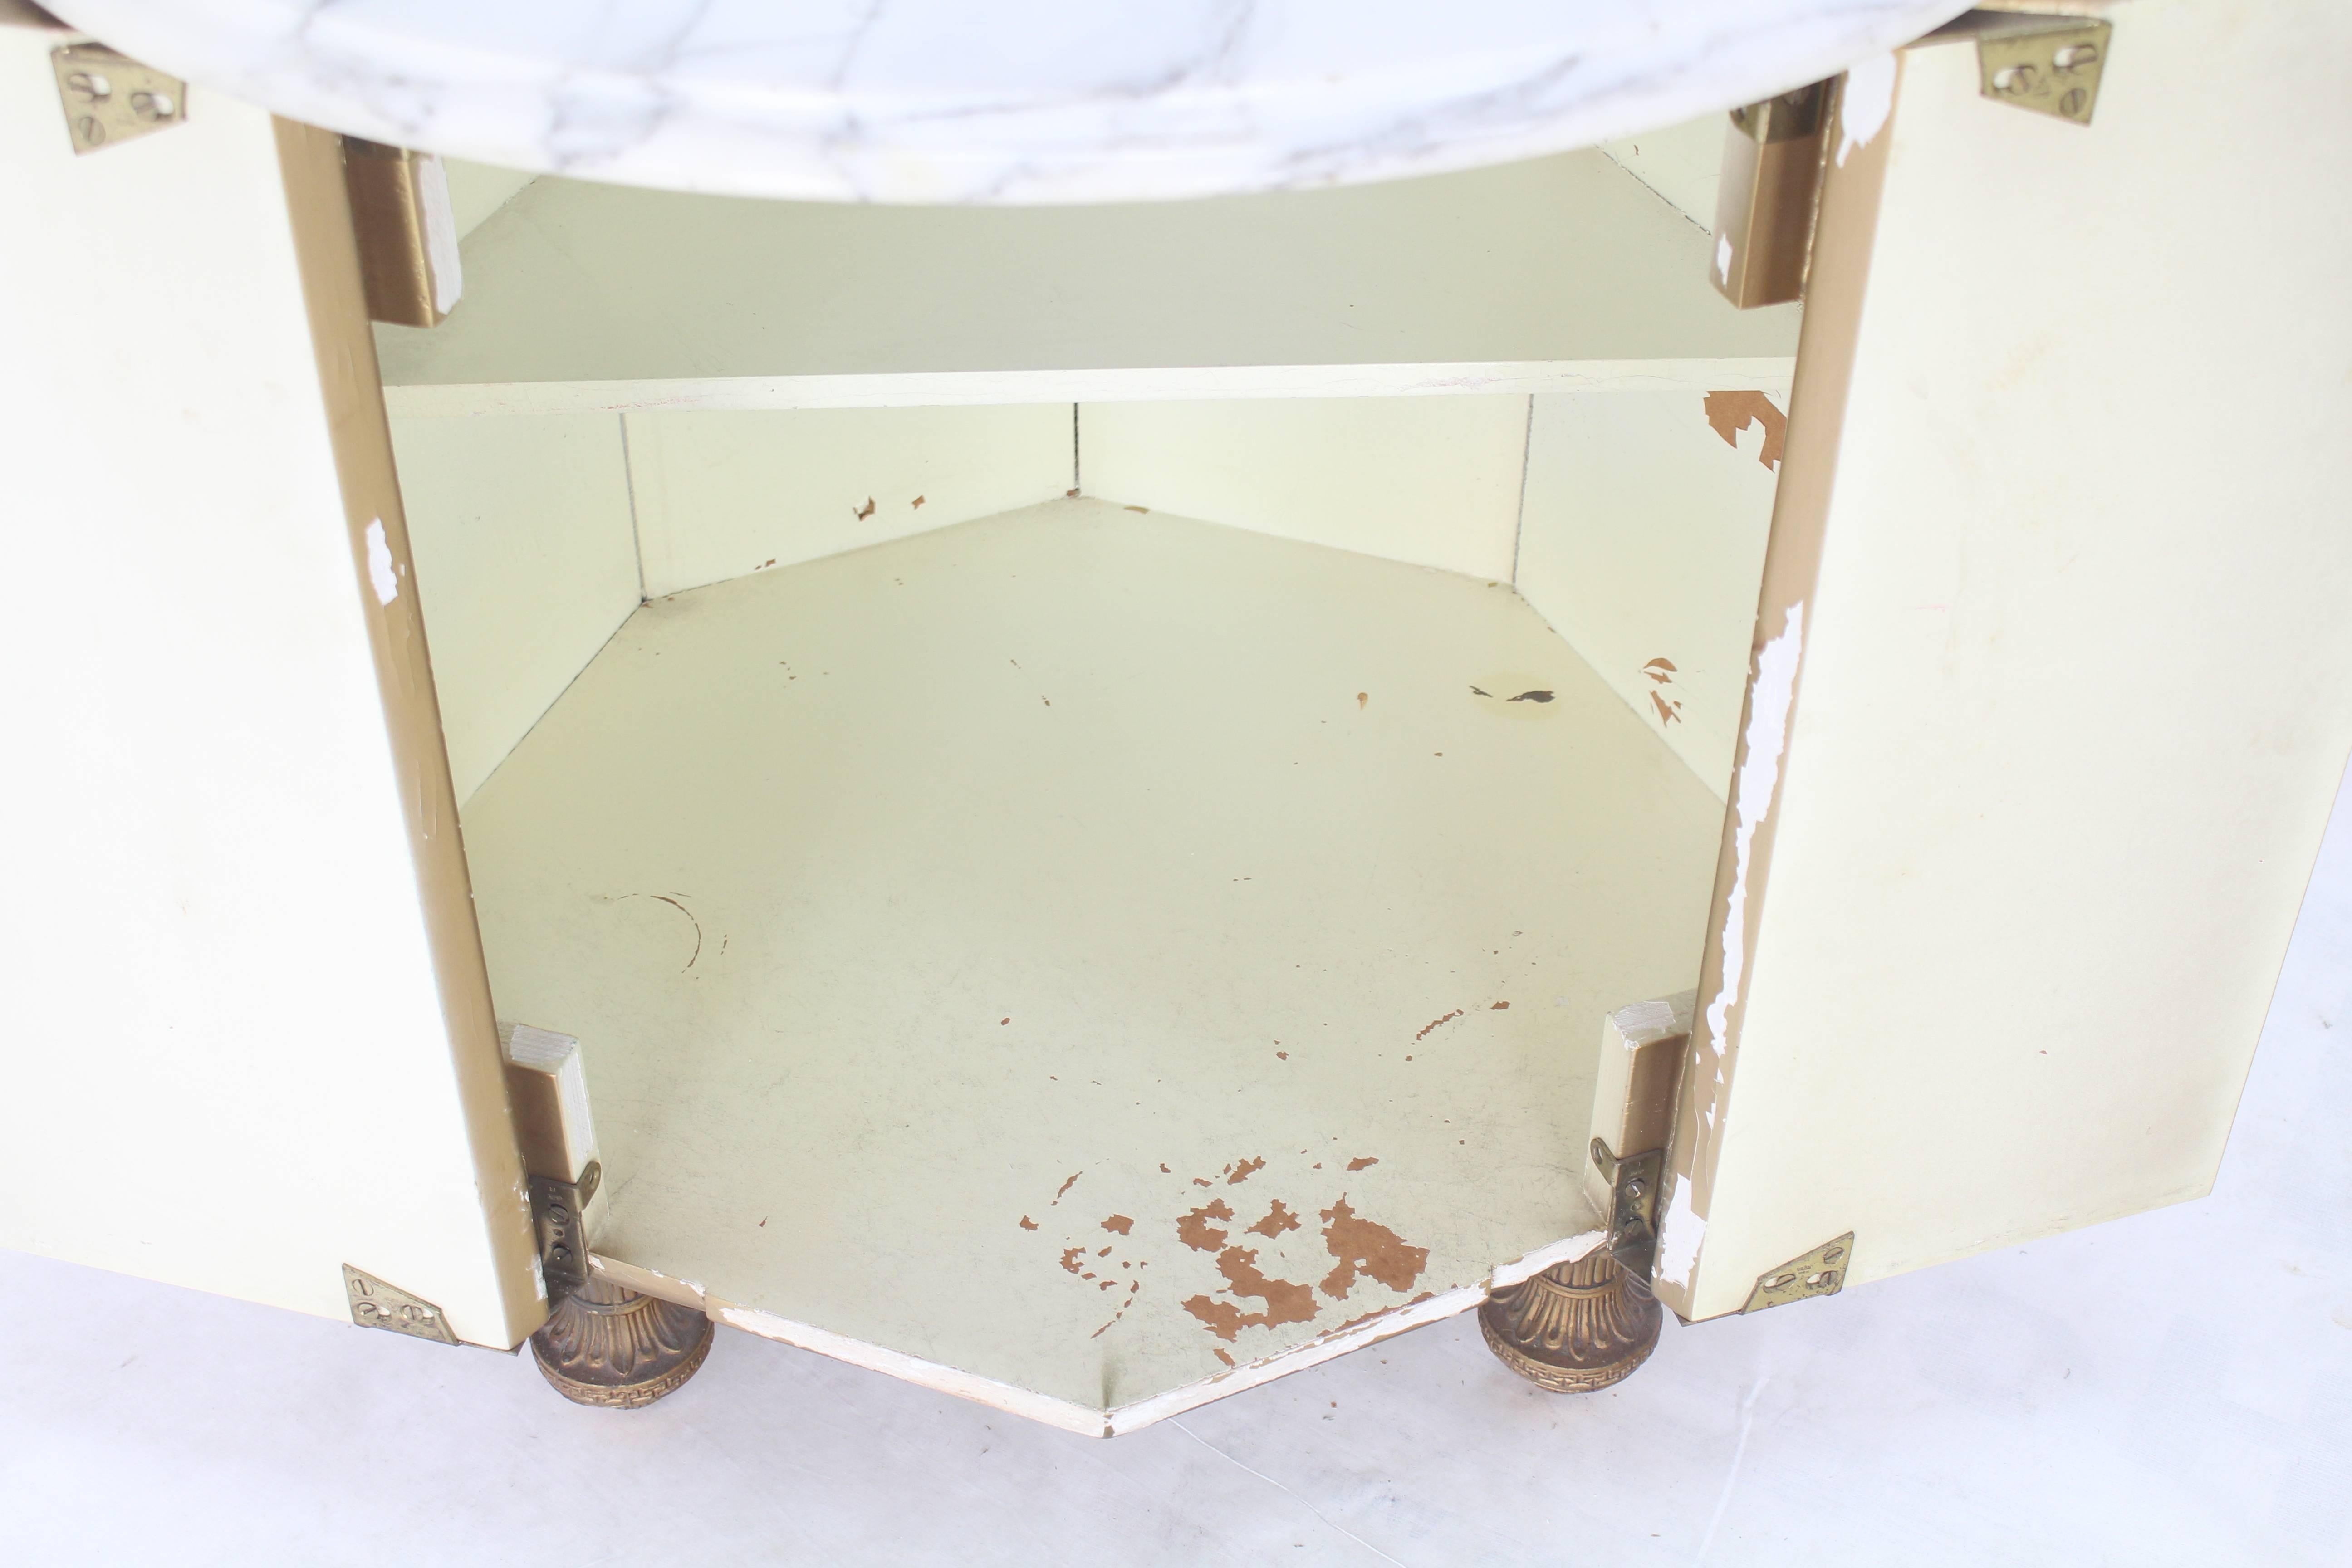 Drum shape reversed gold leaf mirror panels (forming octagon) cabinet nightstand with marble top.